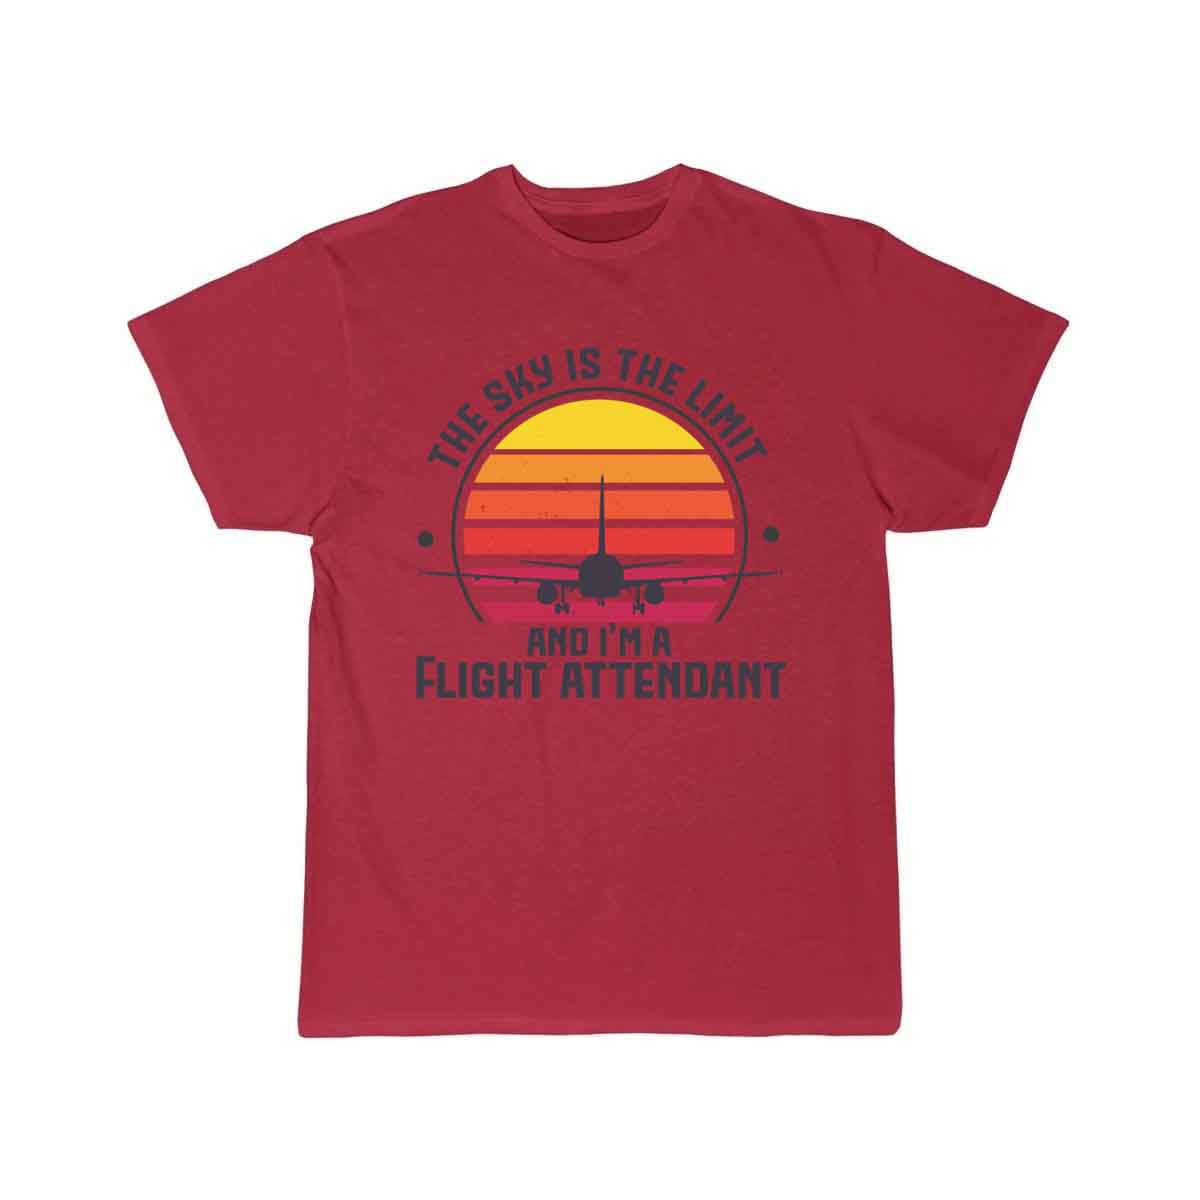 The Sky Is The Limit And Im A Flightatte T-SHIRT THE AV8R